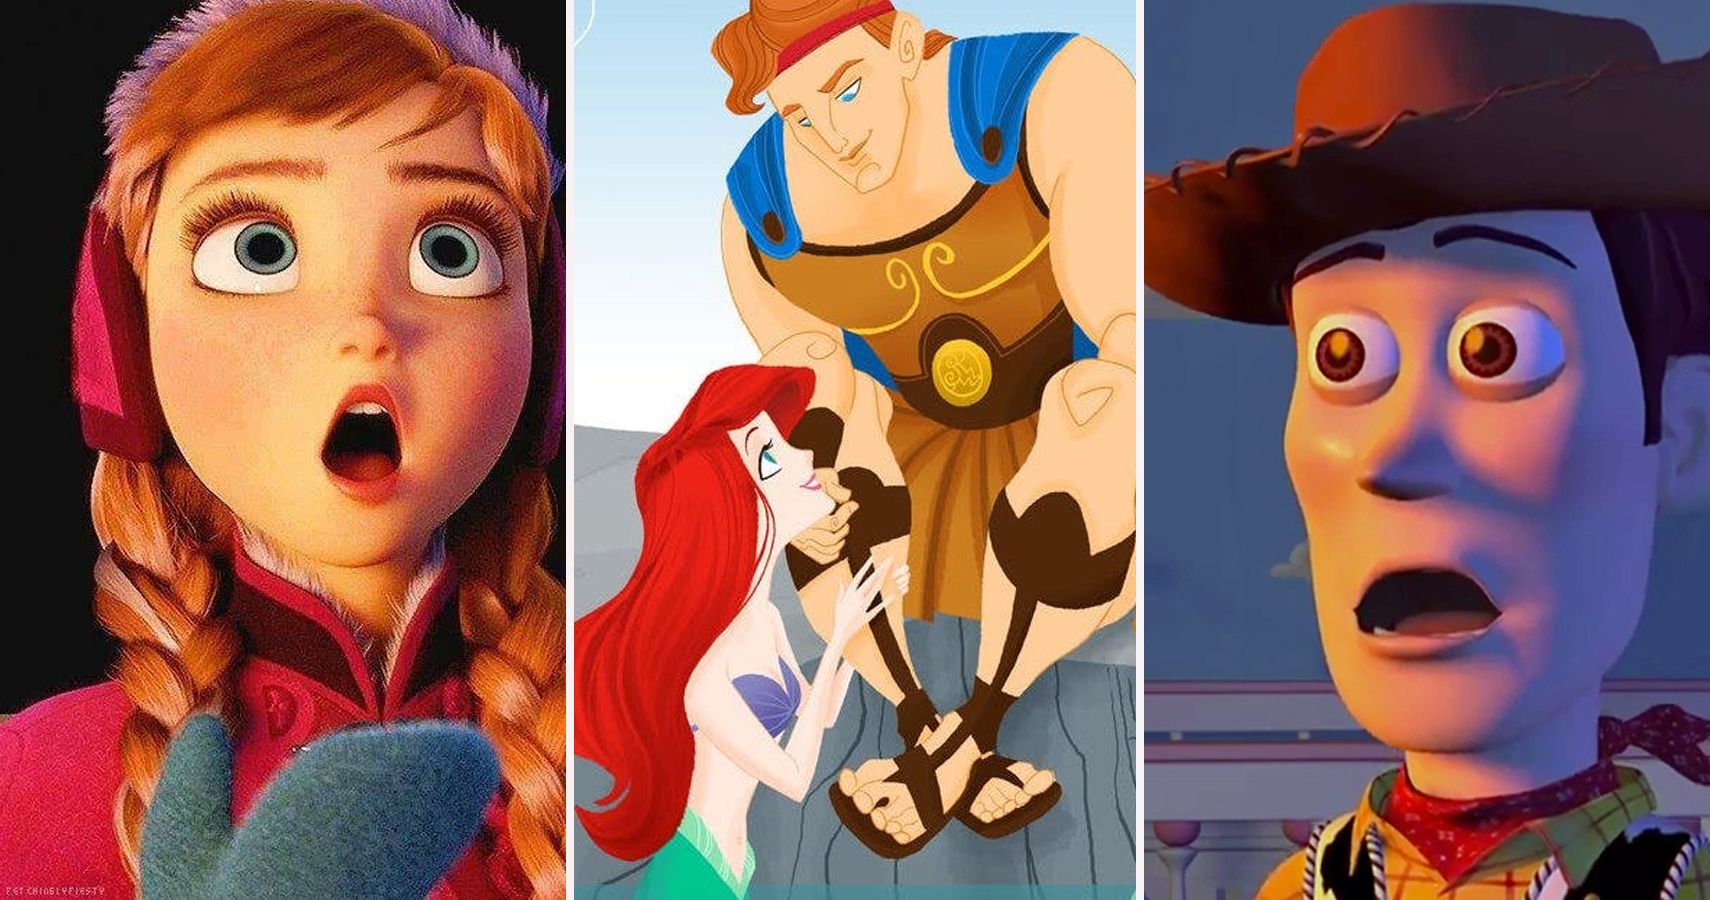 How Does 'Frozen' Compare to Other Disney Princess Films? It Combines The  Most Familiar Elements Of Disney Canon